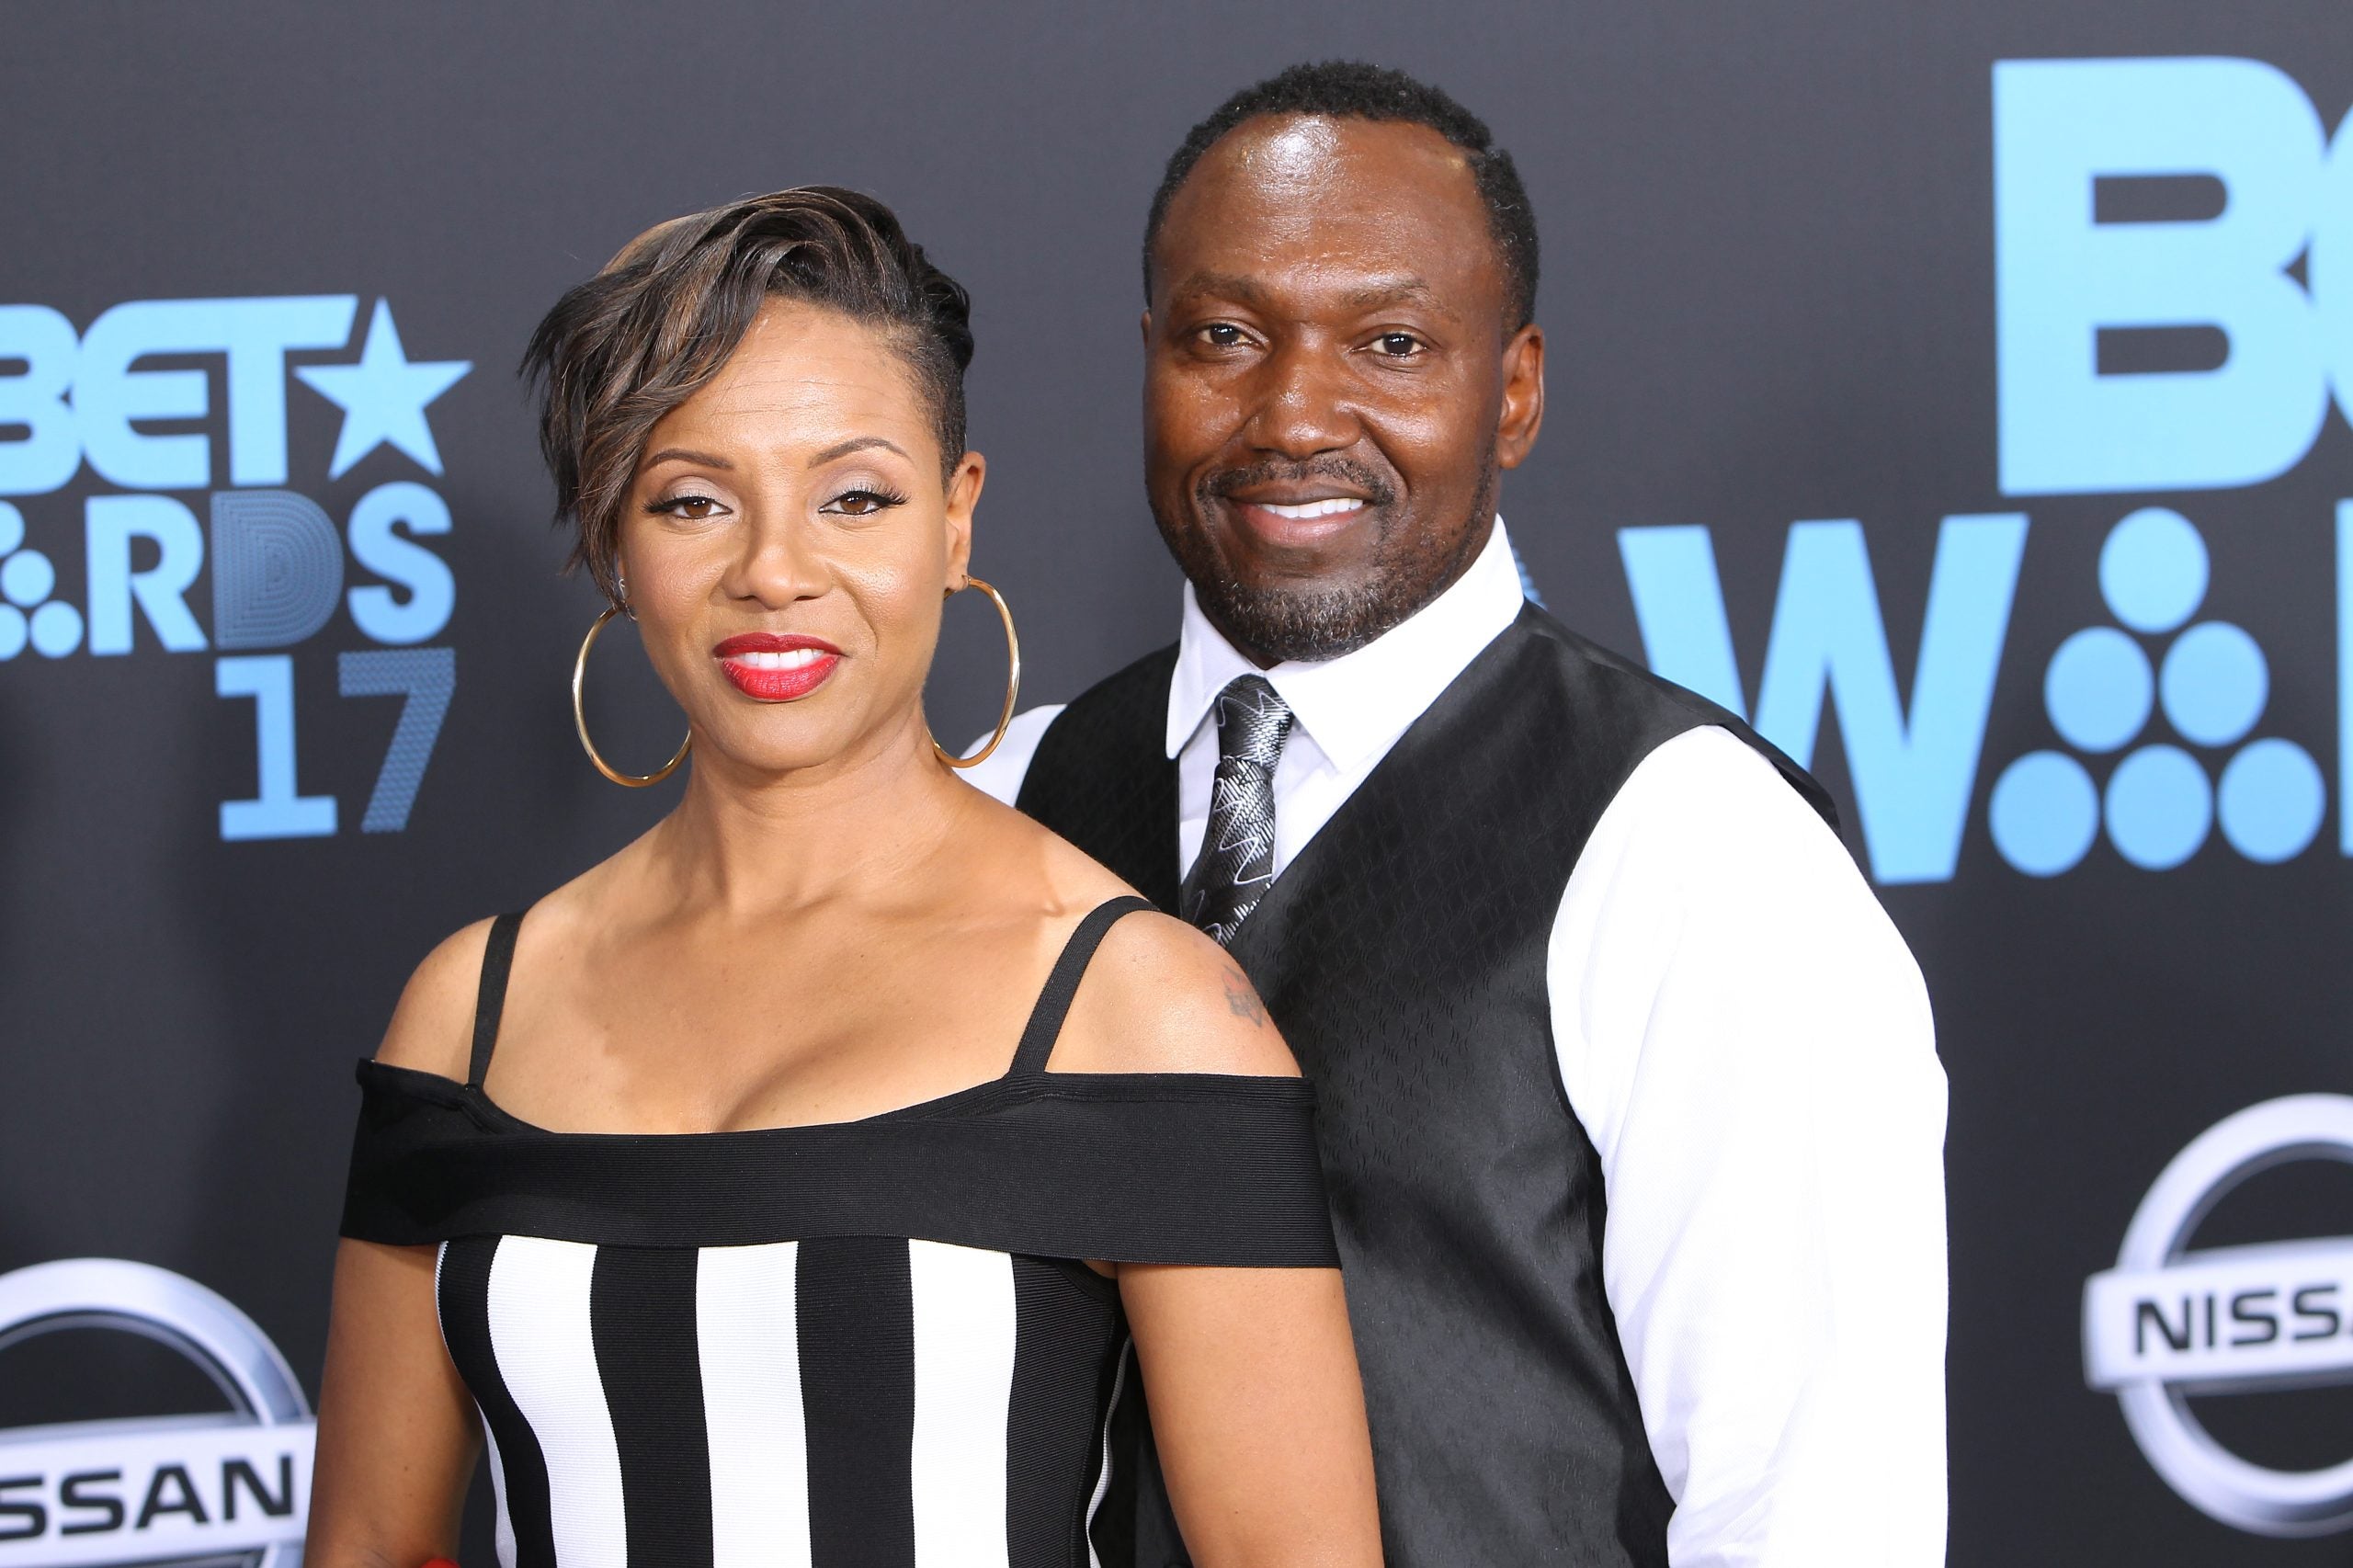 MC Lyte Was "Very Distraught" After Choosing To End Her Marriage Of Three Years